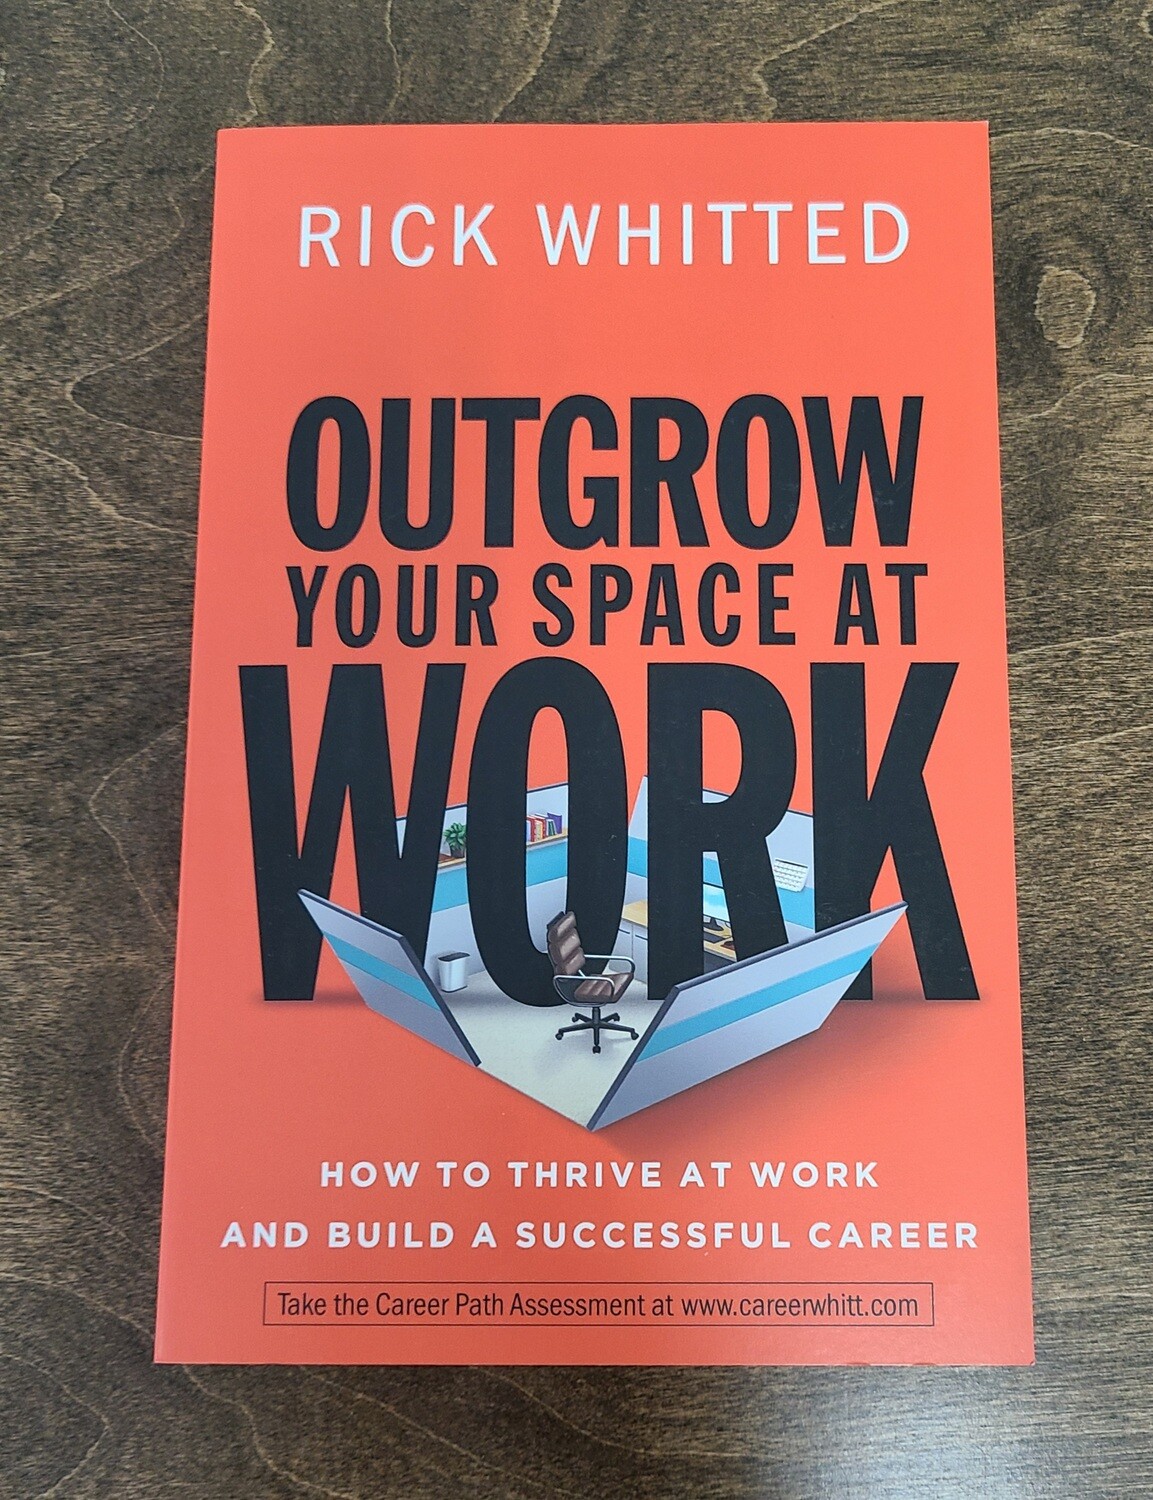 Outgrow your Space at Work by Rick Whitted